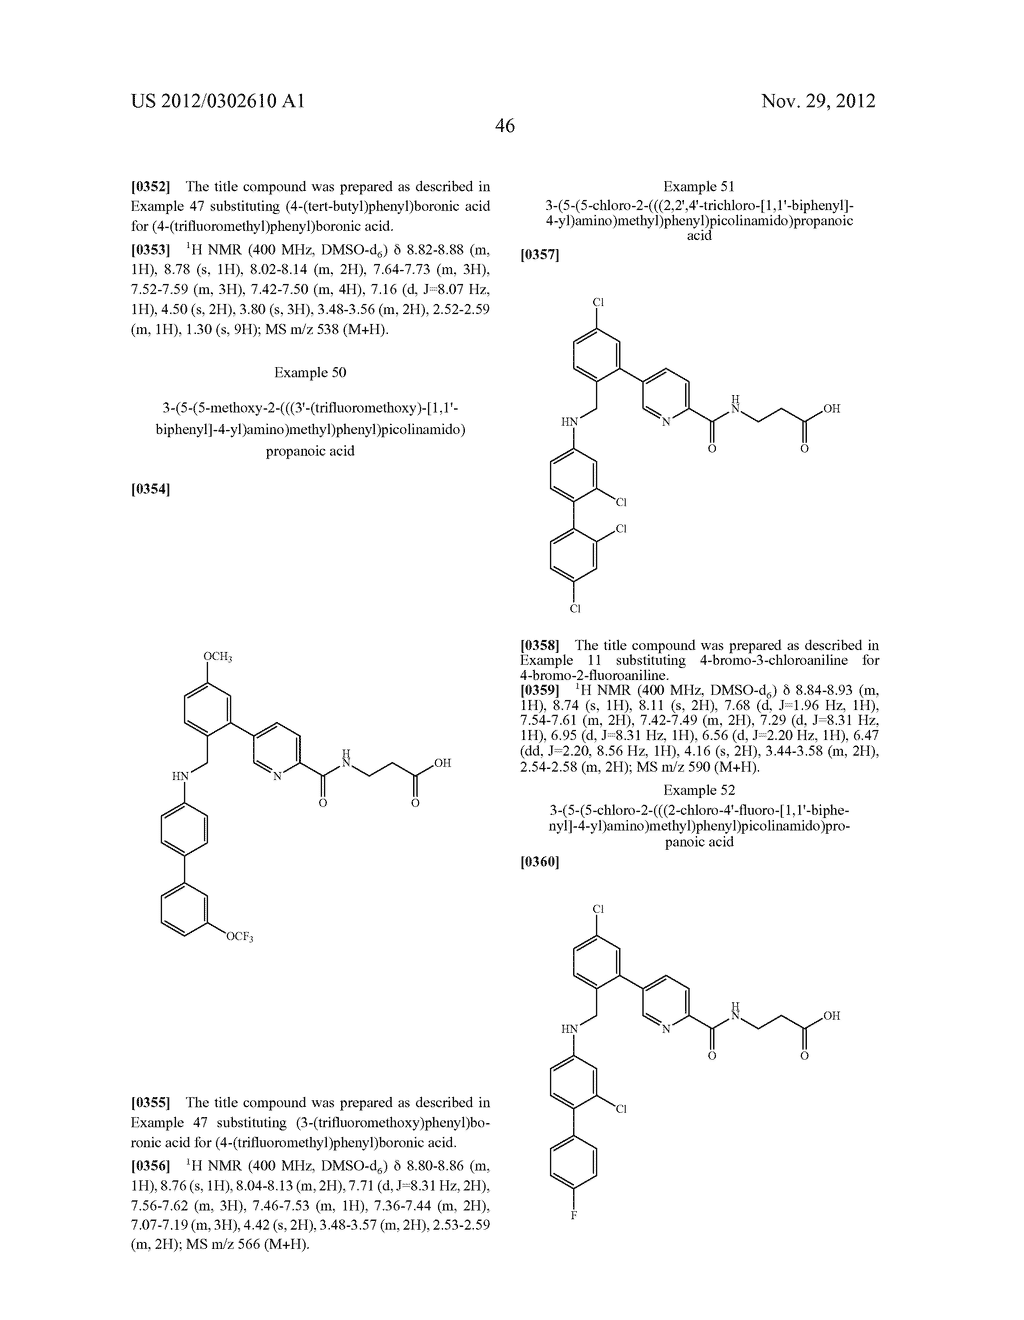 PICOLINAMIDO-PROPANOIC ACID DERIVATIVES USEFUL AS GLUCAGON RECEPTOR     ANTAGONISTS - diagram, schematic, and image 47